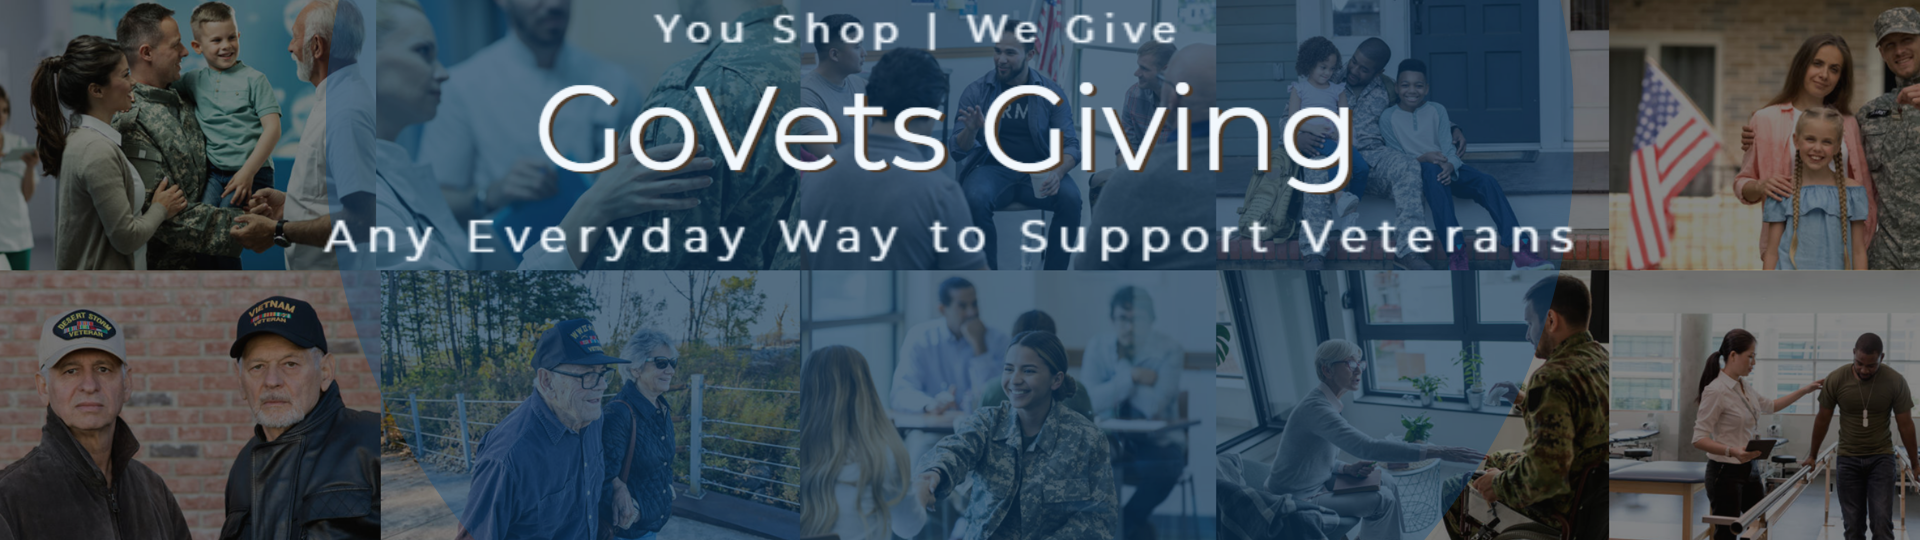 GoVets Giving - An Everyday Way to Support Veterans